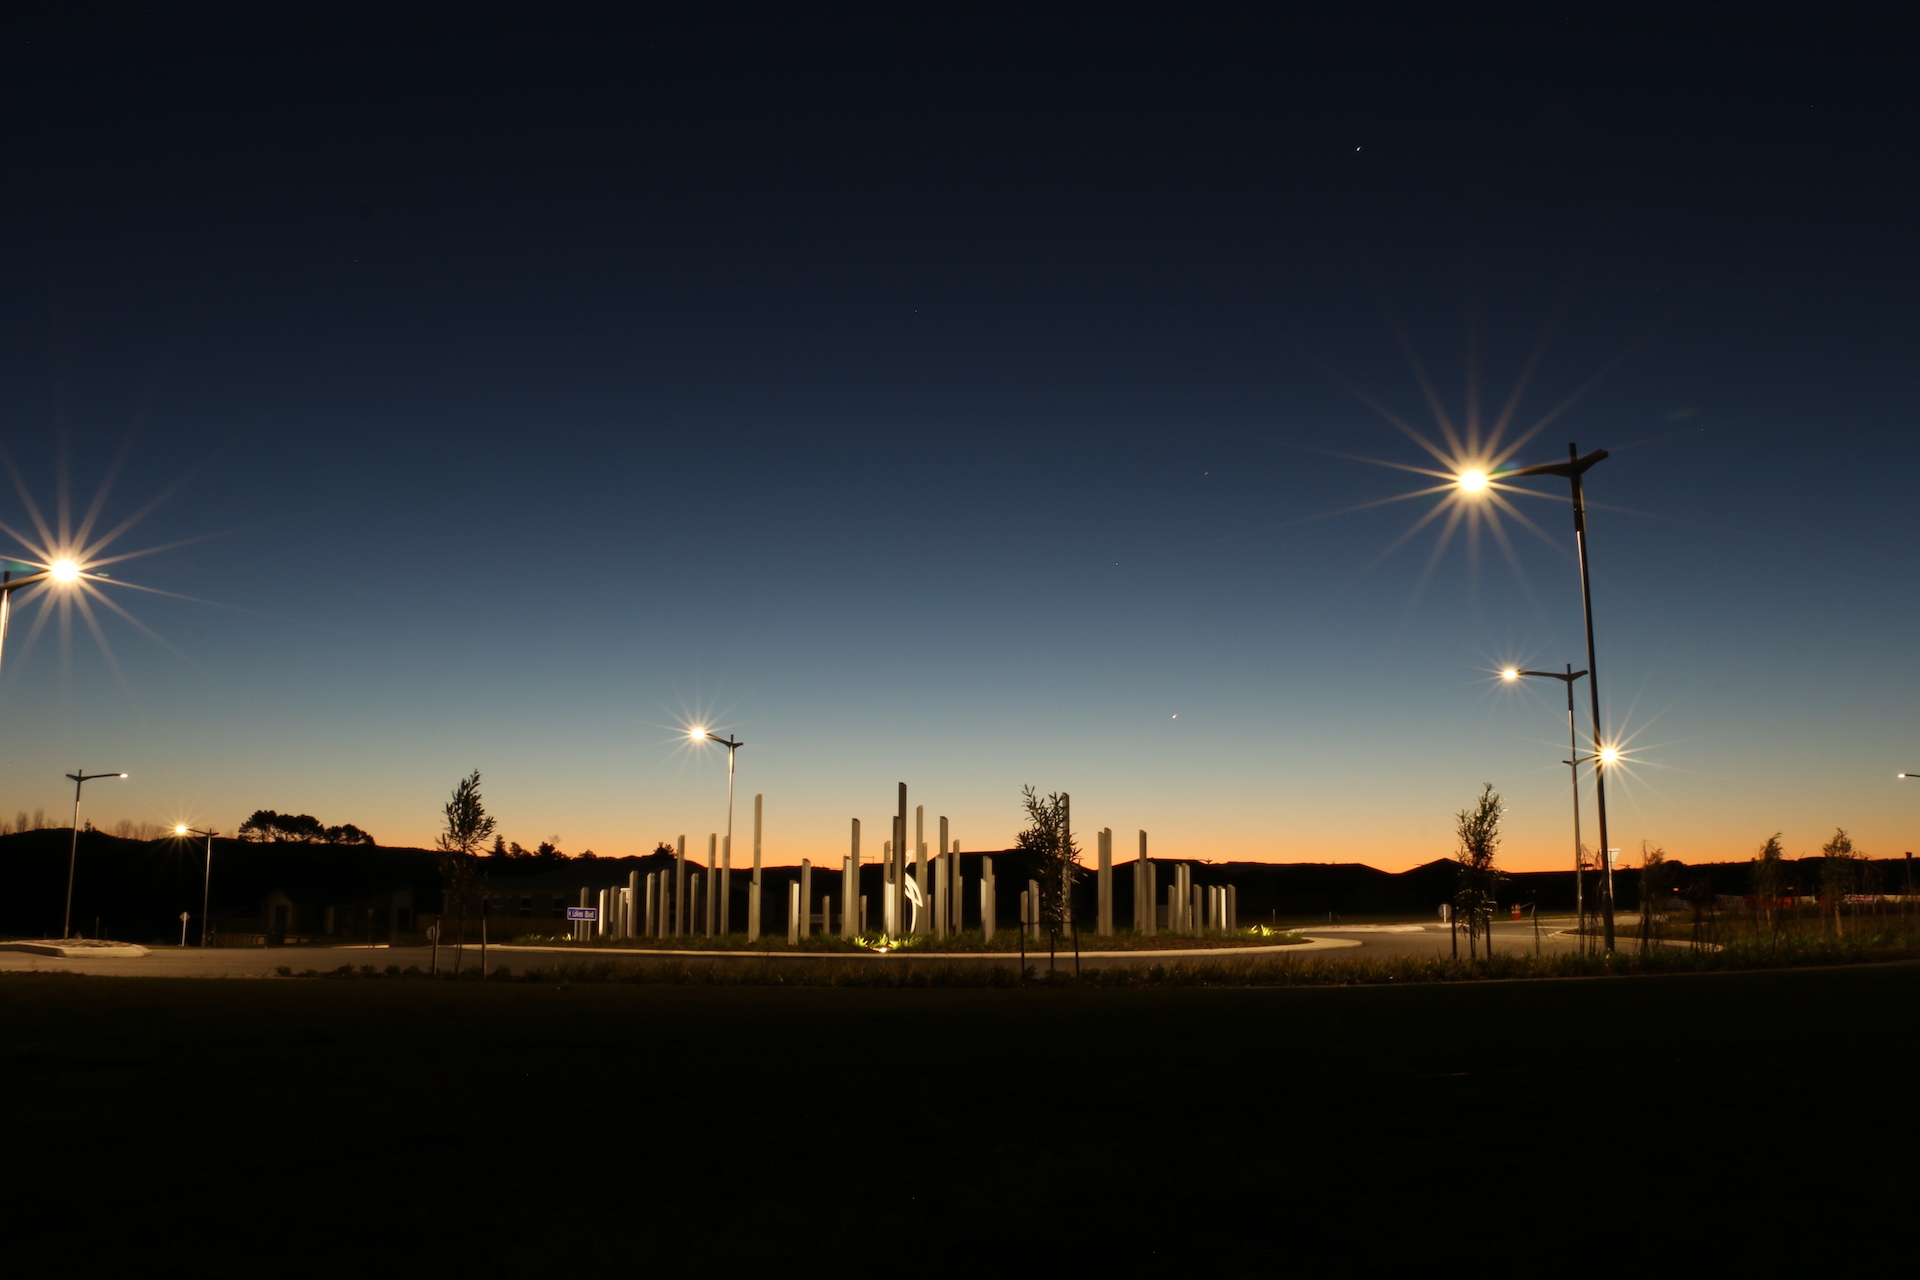 The Lakes roundabout at night illuminated by ibex lighting solutions.